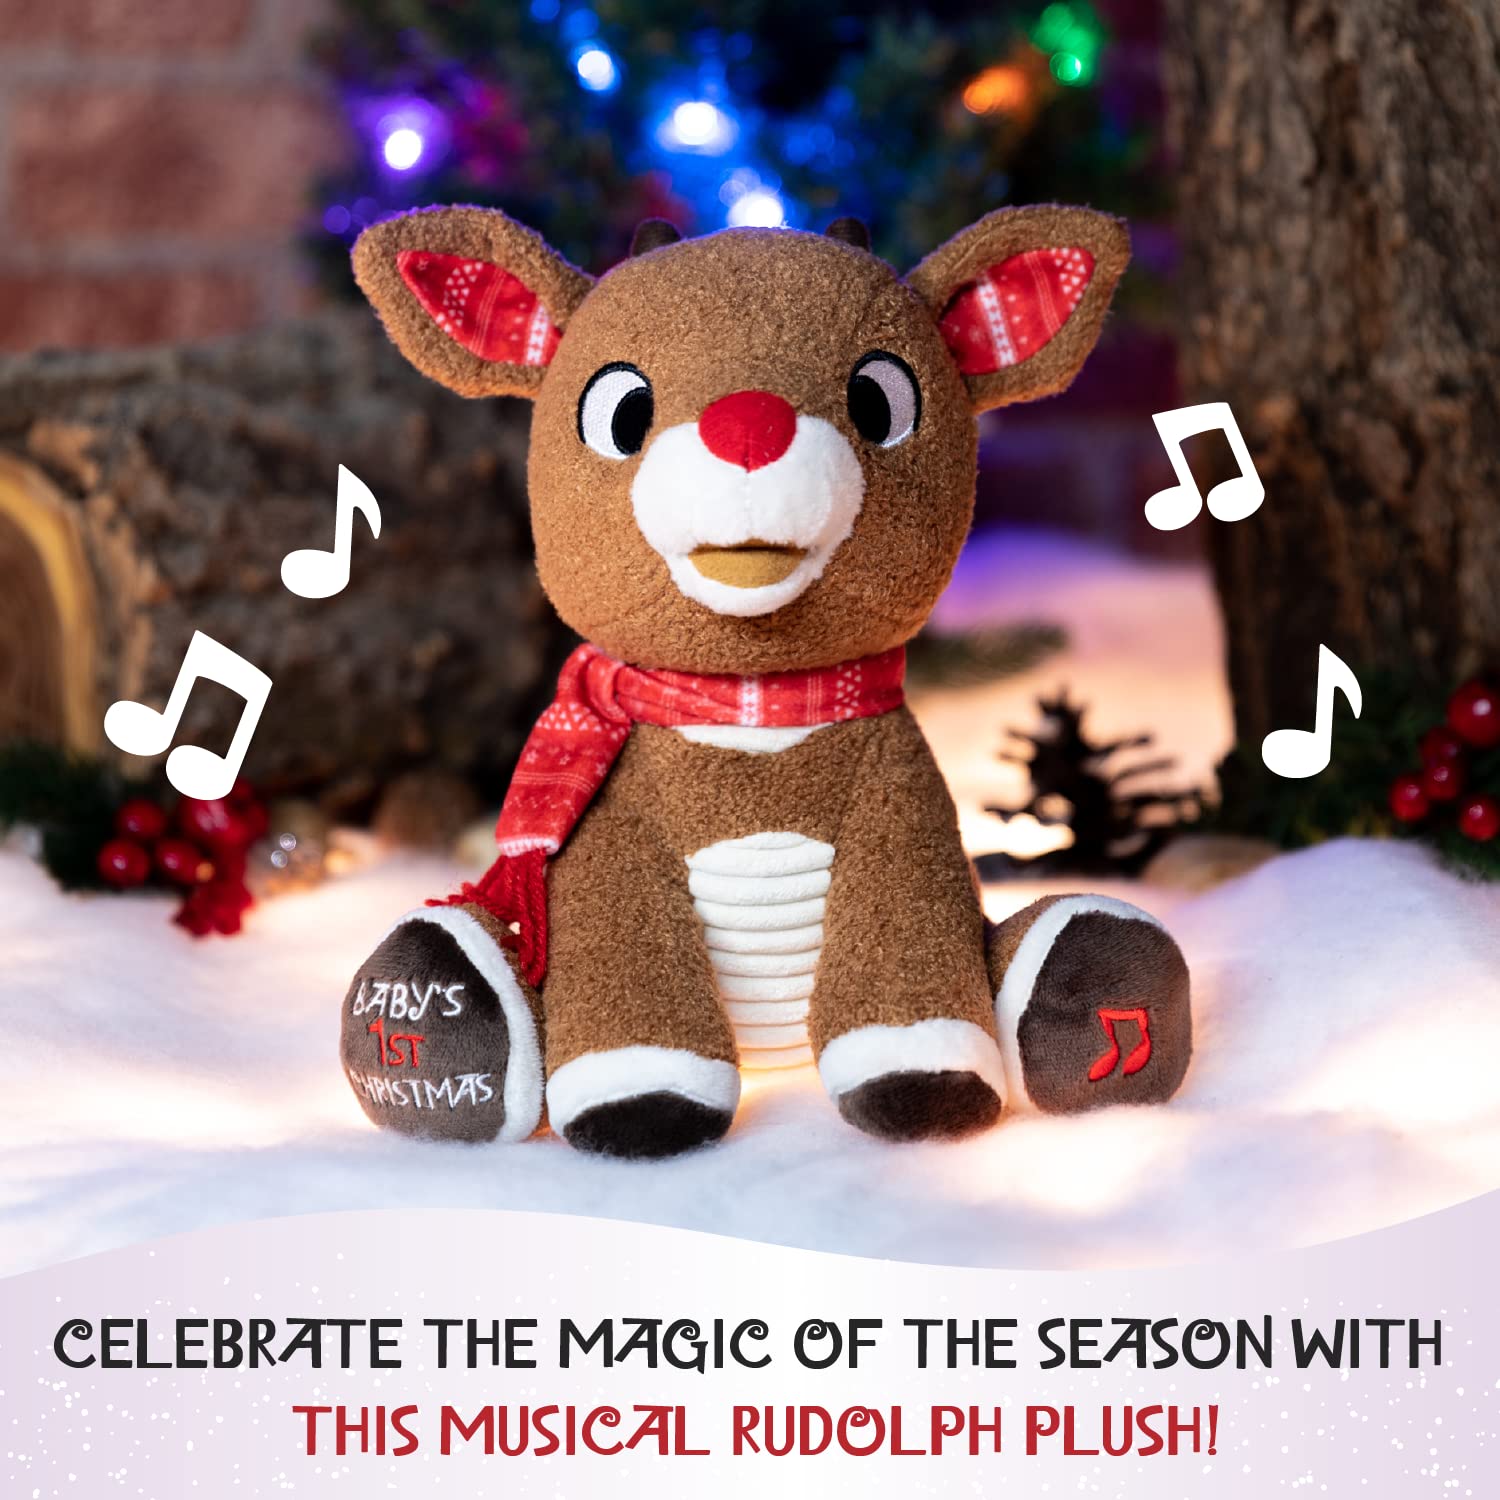 Rudolph The Red-Nosed Reindeer Musical Stuffed Animal, Baby's First Christmas Plush, 8 Inches